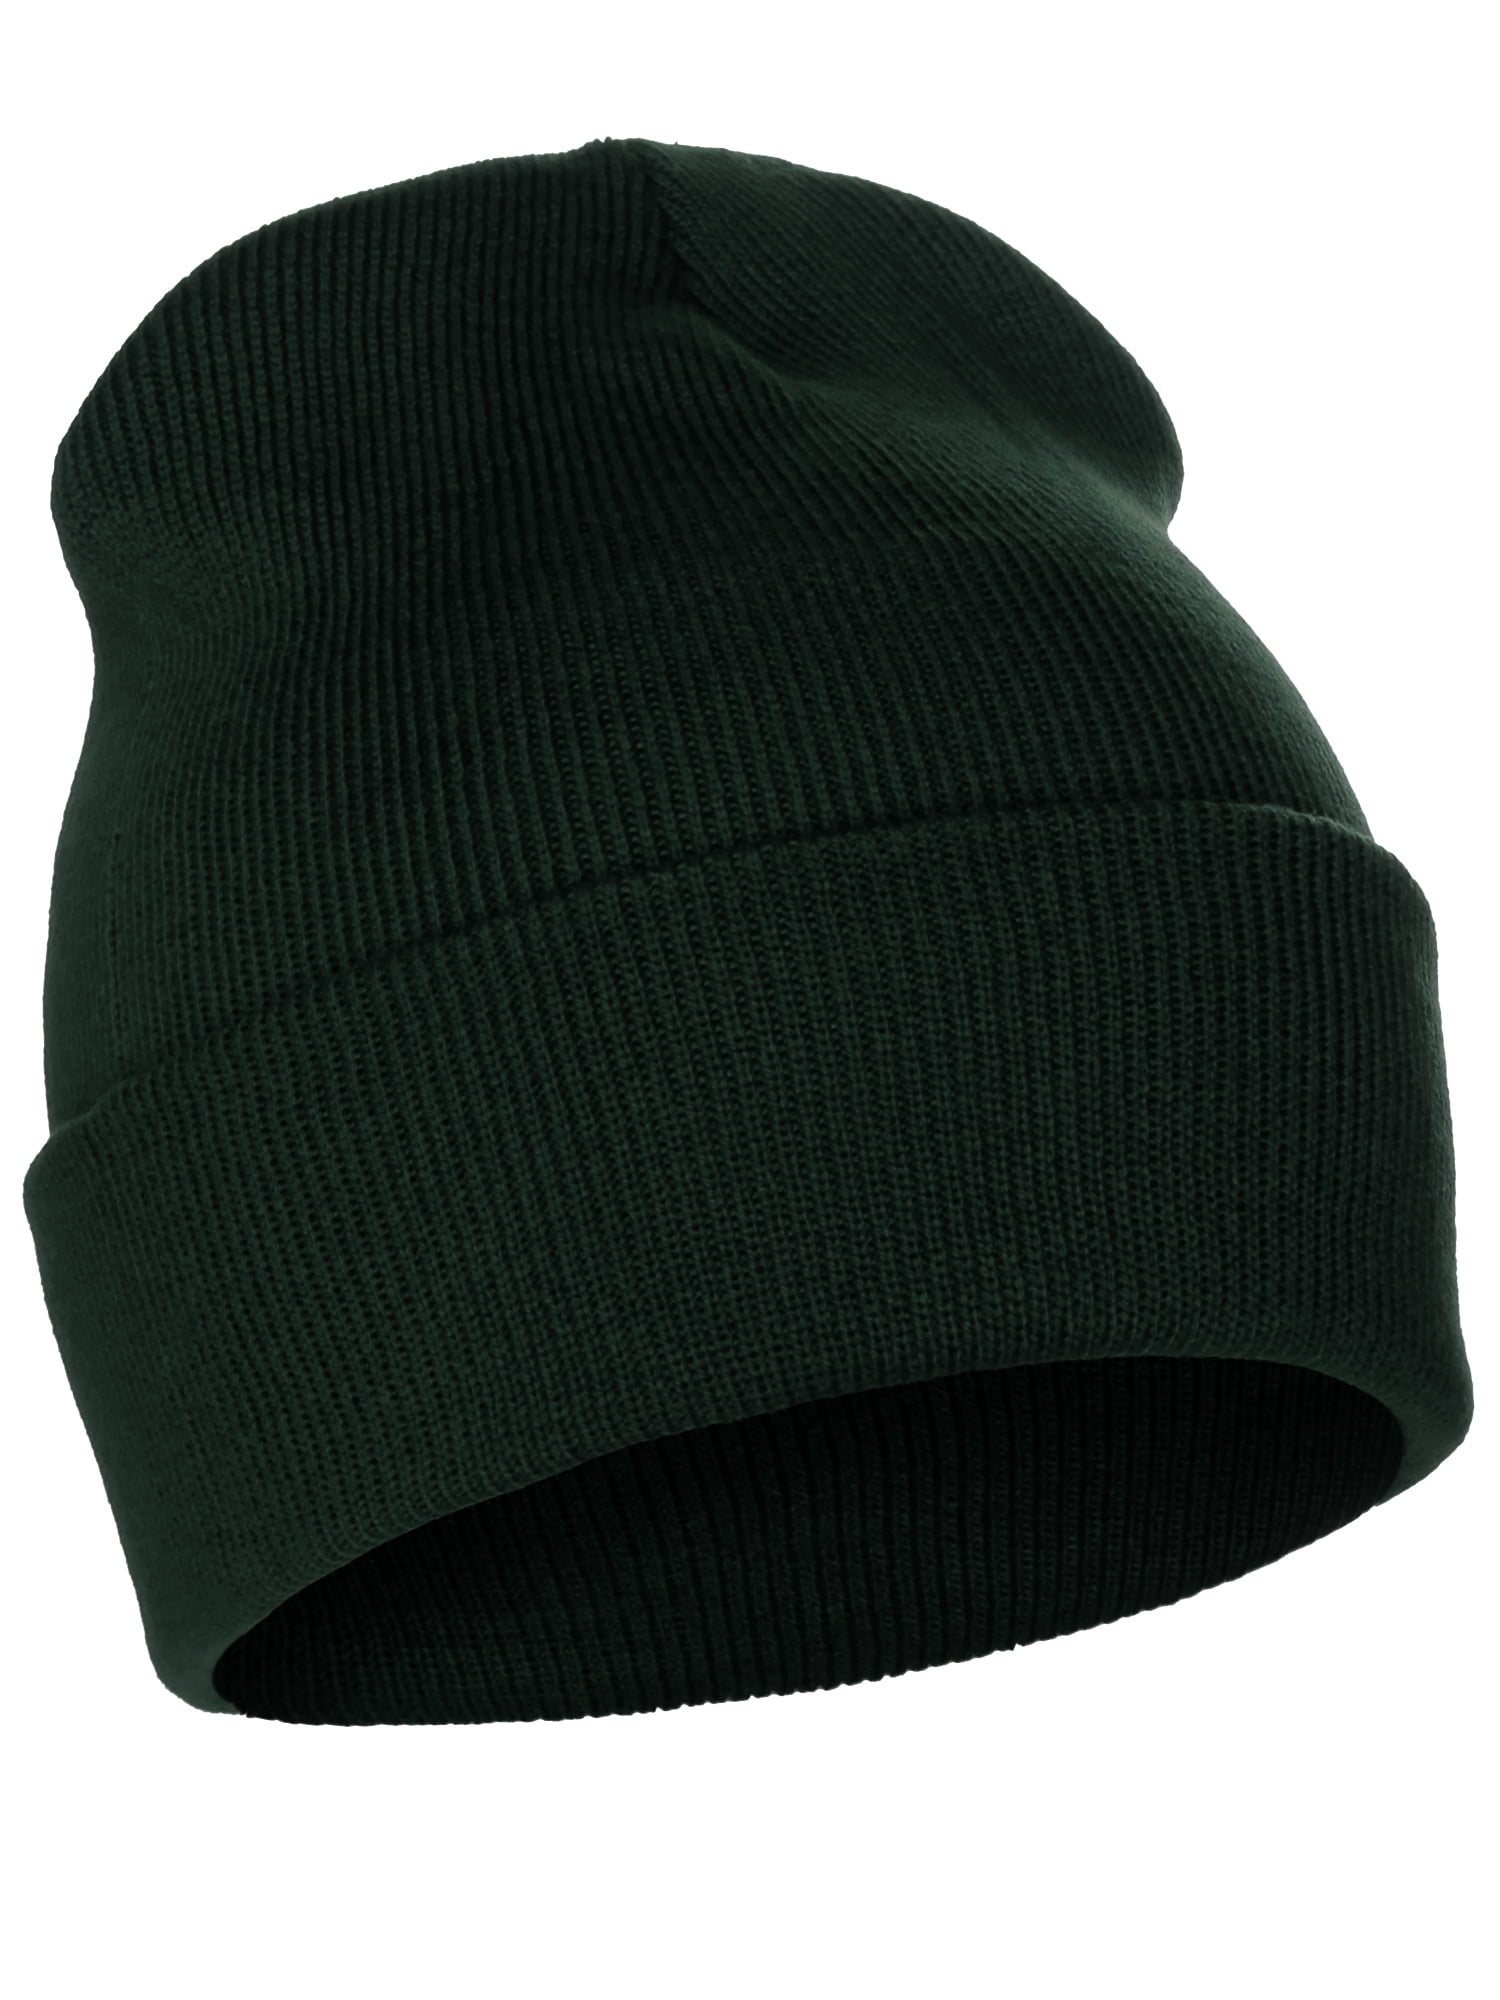 Classic Plain Cuffed Beanie Knit Skully Turquoise Winter Hat Cap